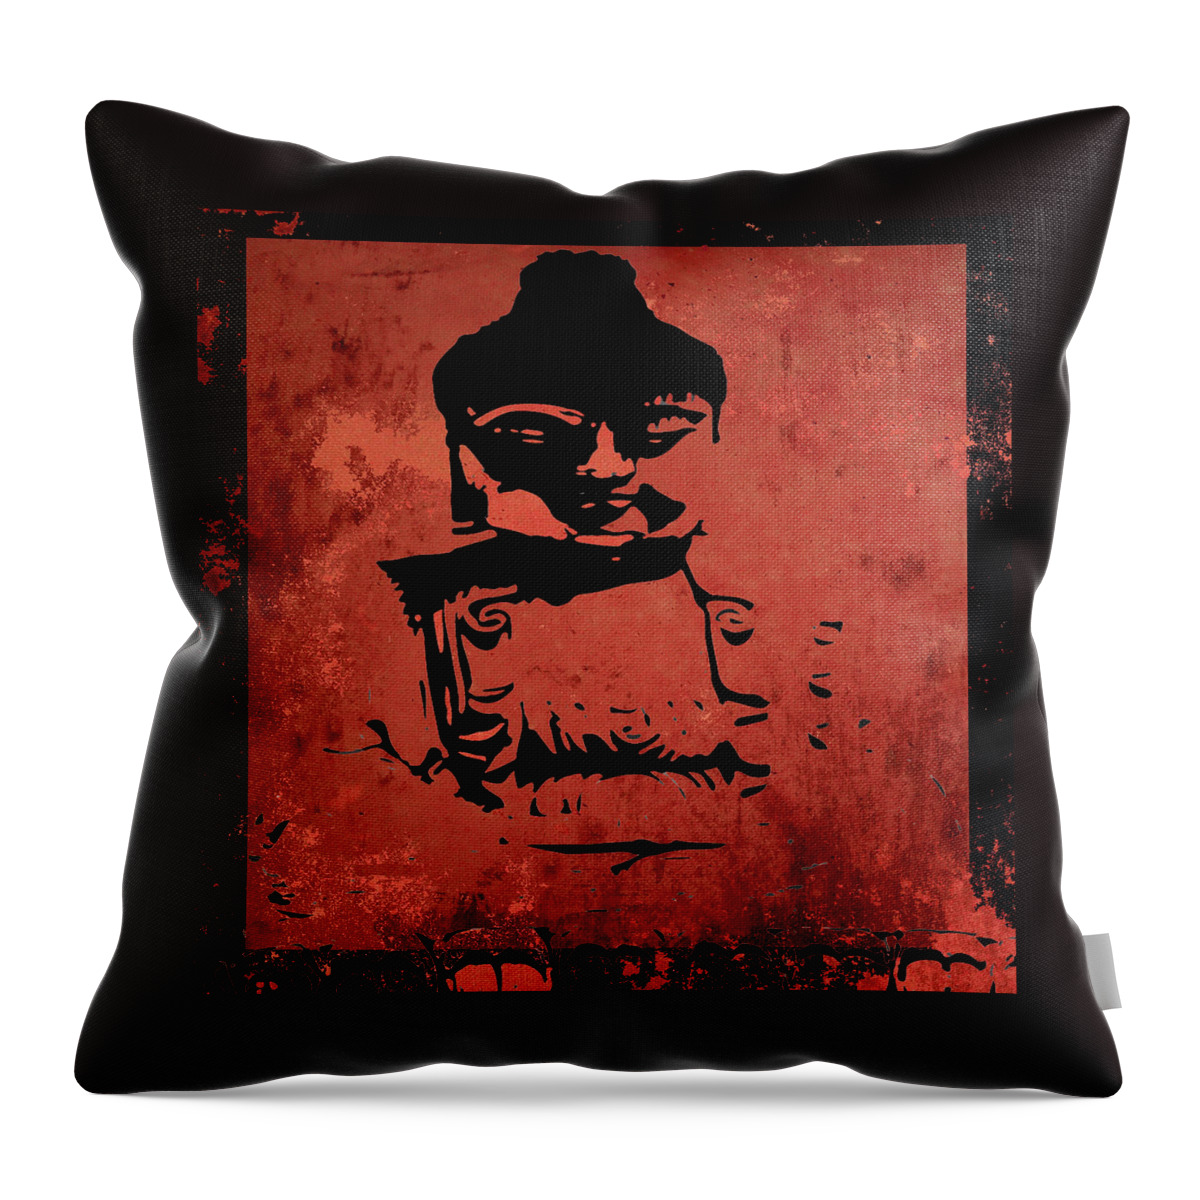 Big Red Buddha Throw Pillow featuring the mixed media Big Red Buddha by Kandy Hurley